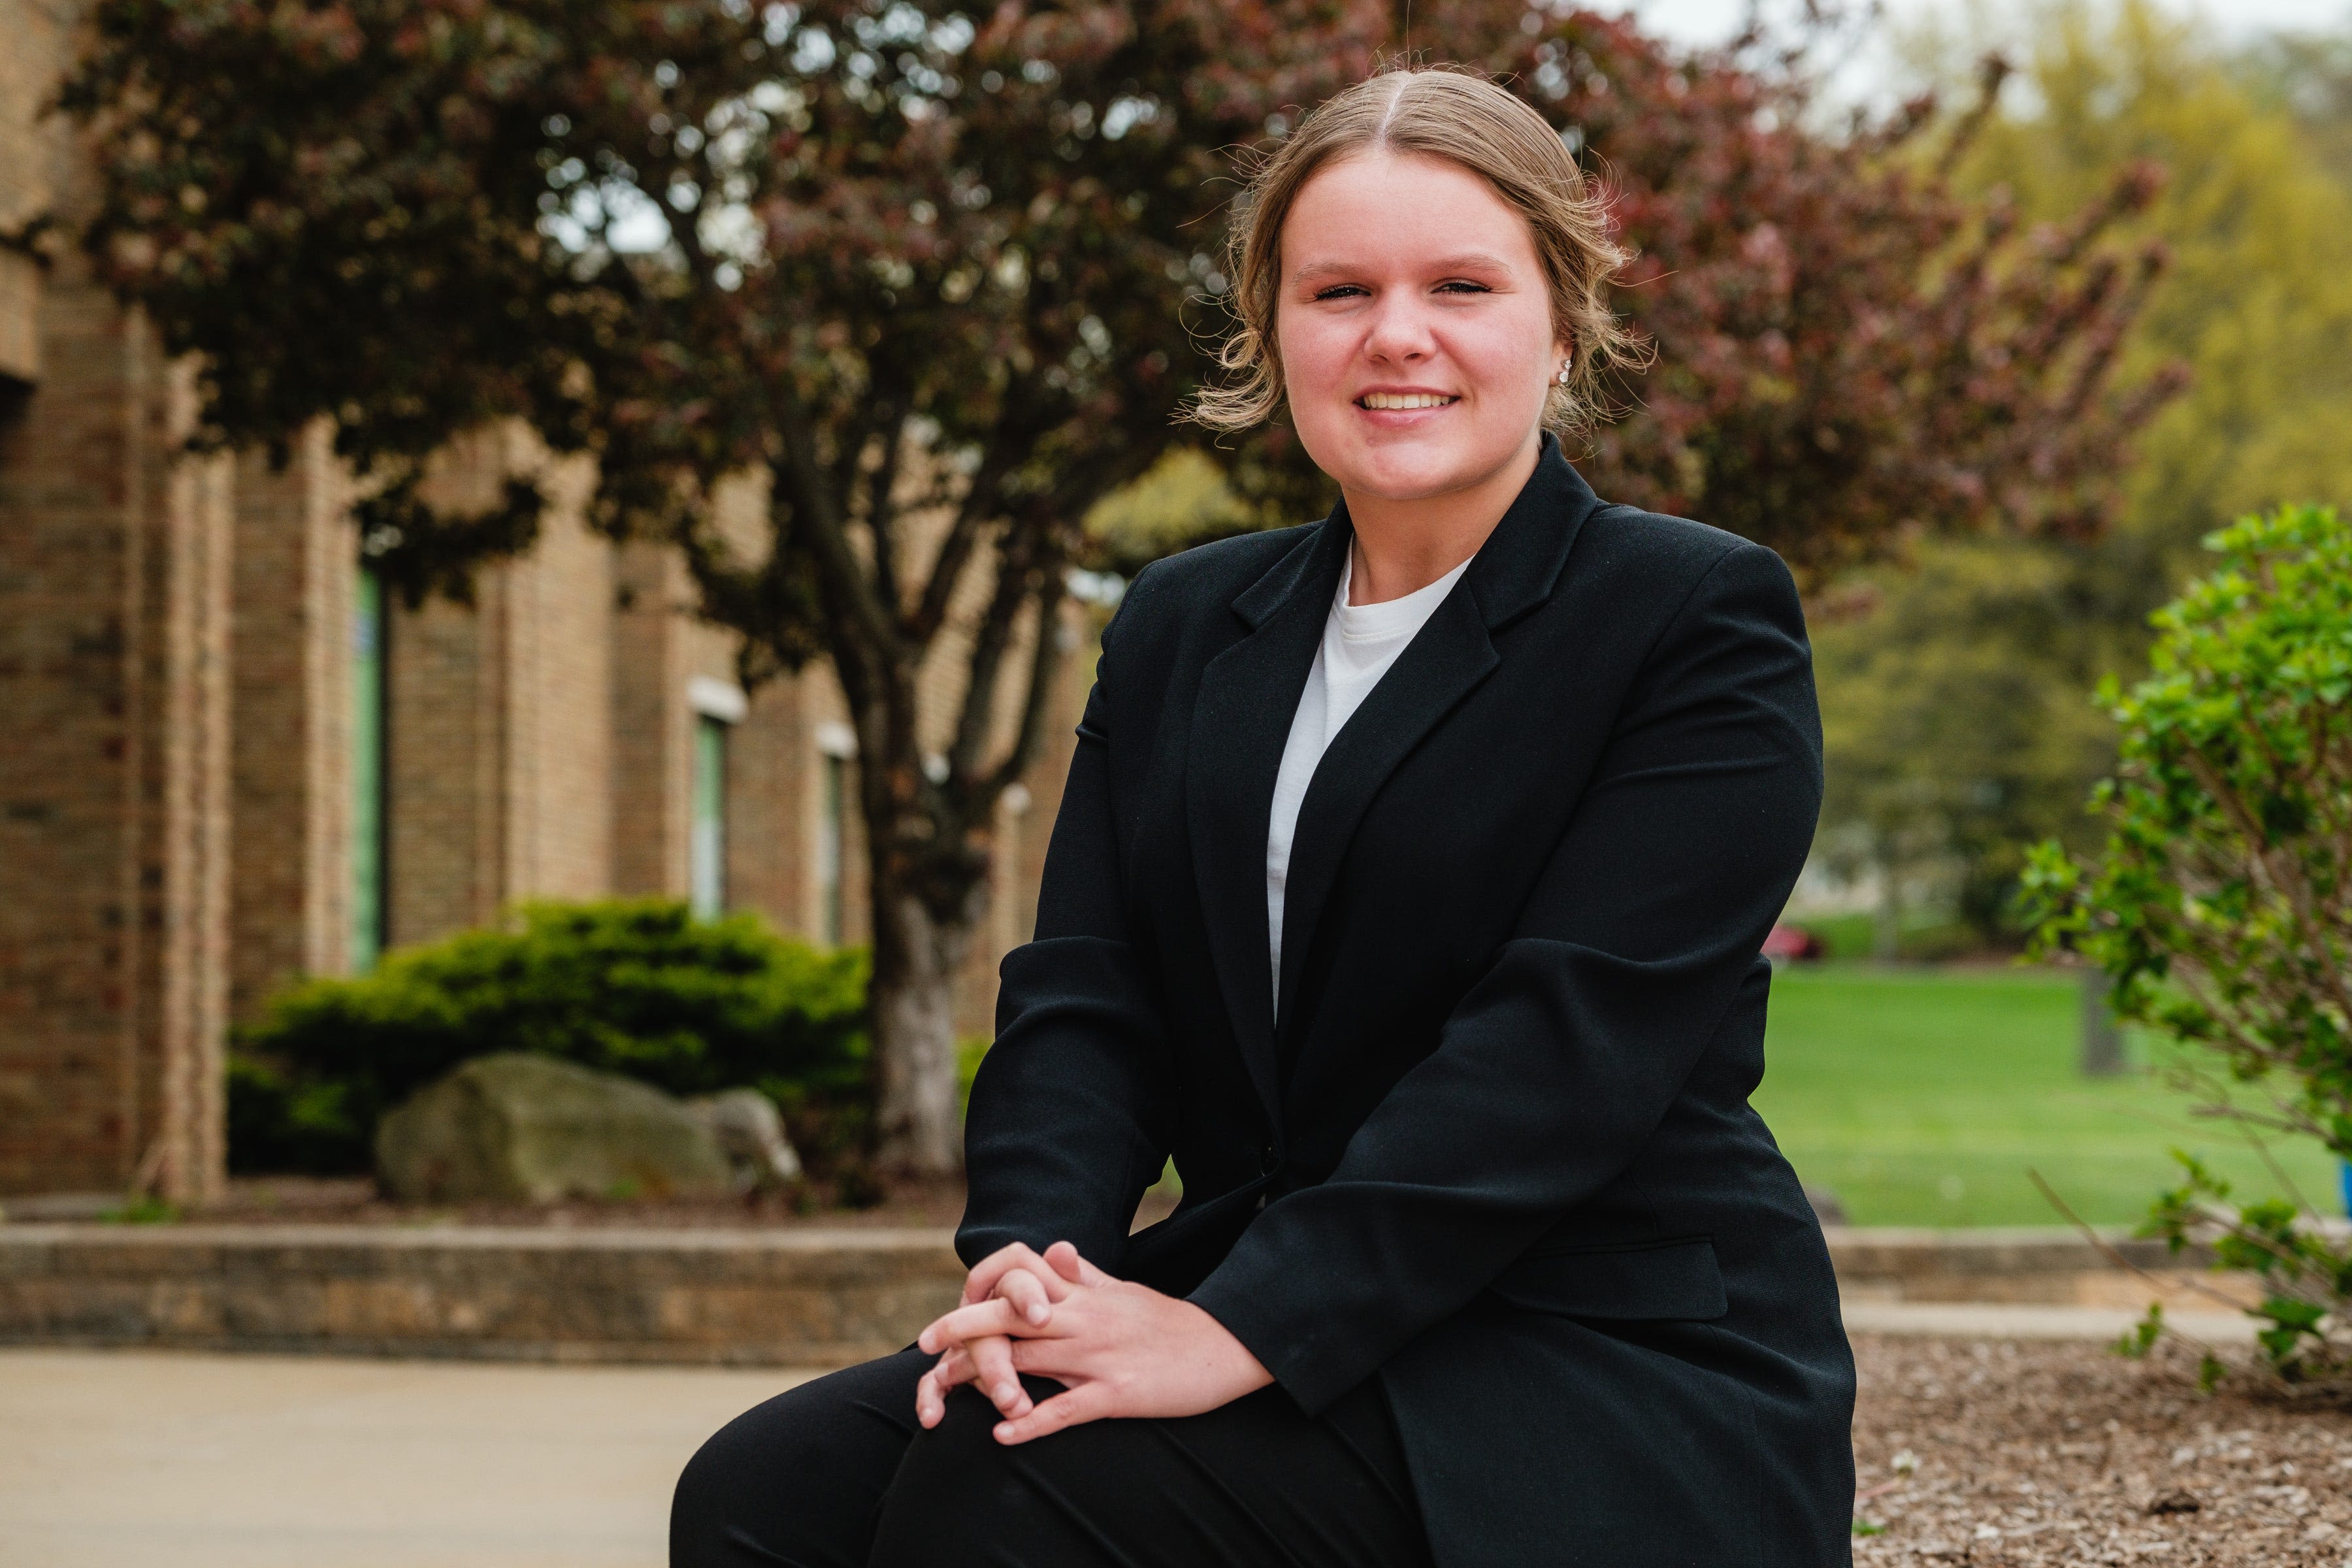 Senior spotlight: Claymont's Ellie Baker served as CEO of her own company in high school